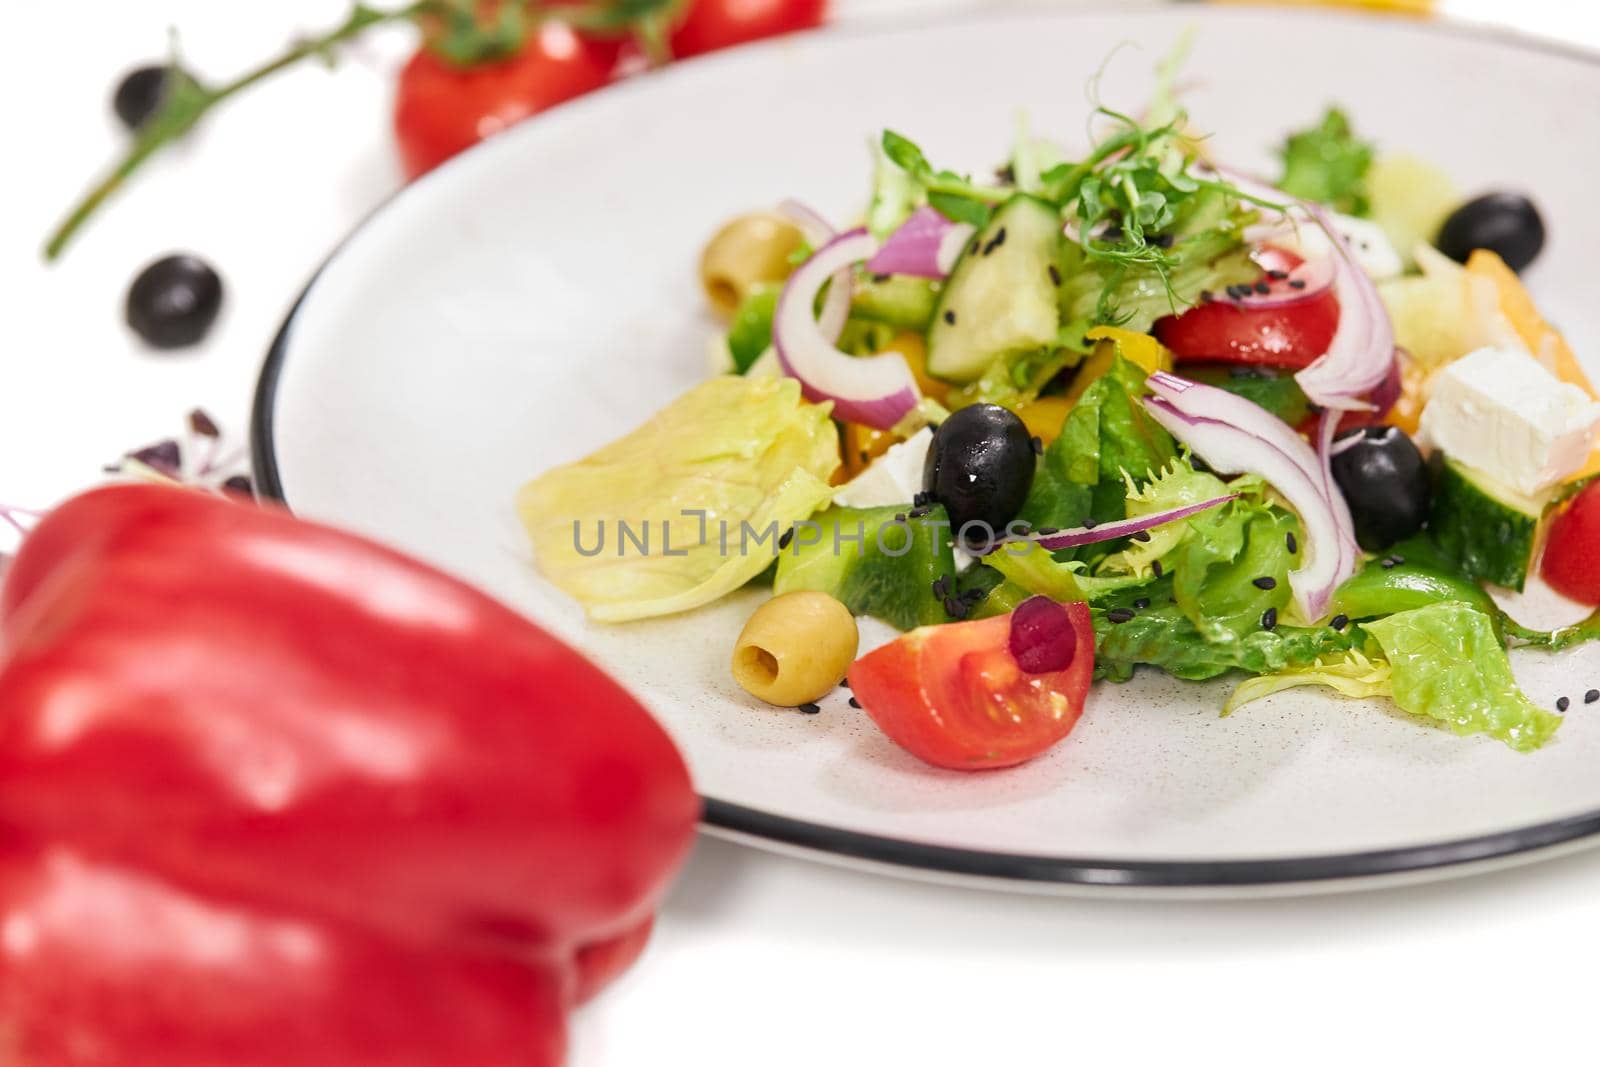 Close up of delicious vegetables salad with appetizing tomatoes,olives,greens,onions and feta cheese on white background. Concept of proper nutrition for weight loss.